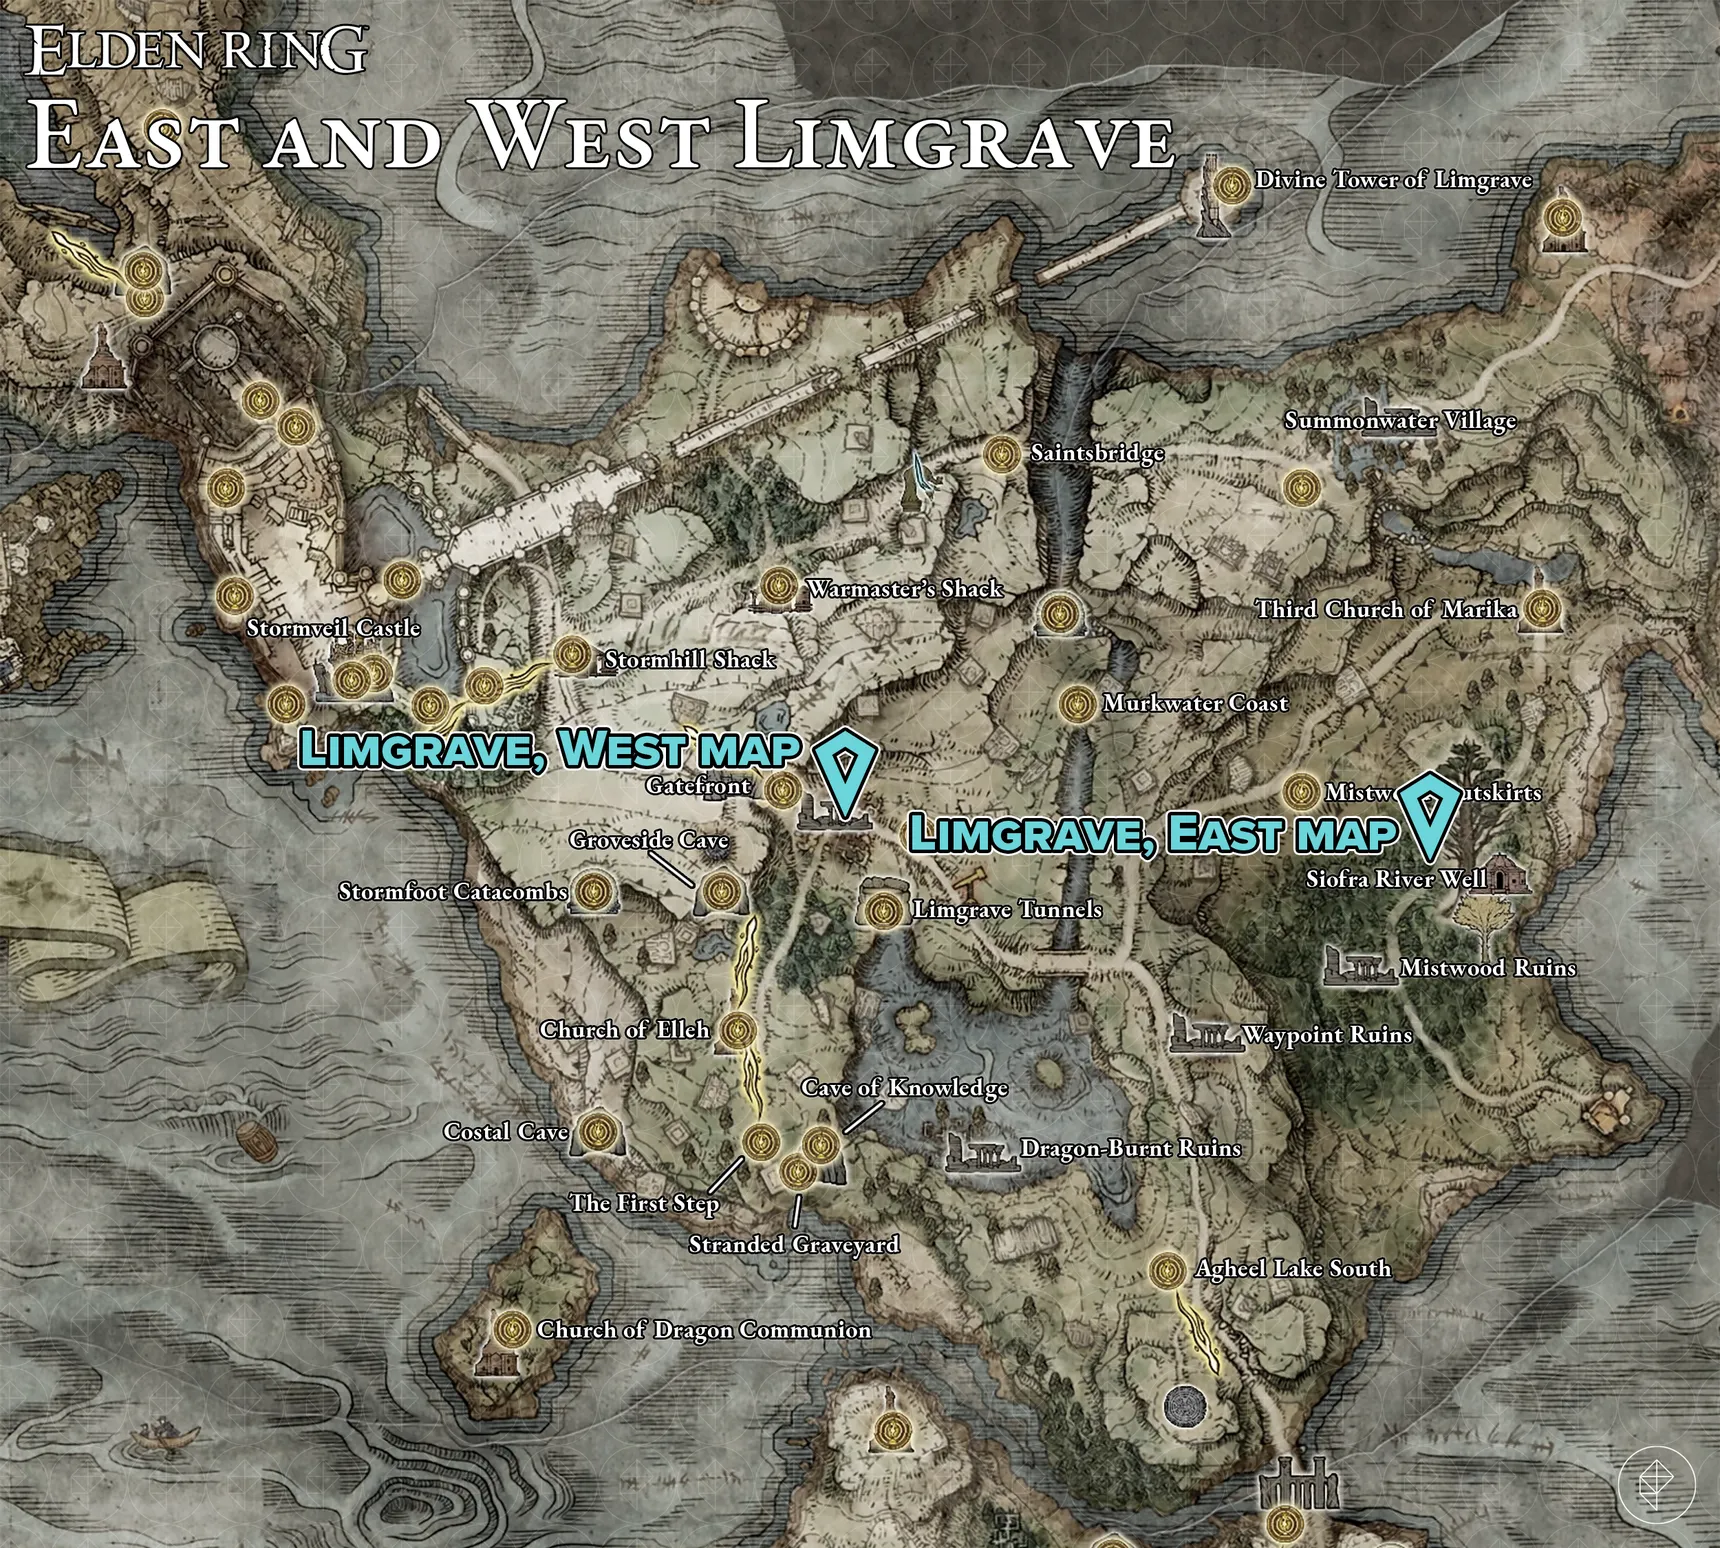 EAST LIMGRAVE AND WEST LIMGRAVE MAP FRAGMENT STELE LOCATIONS